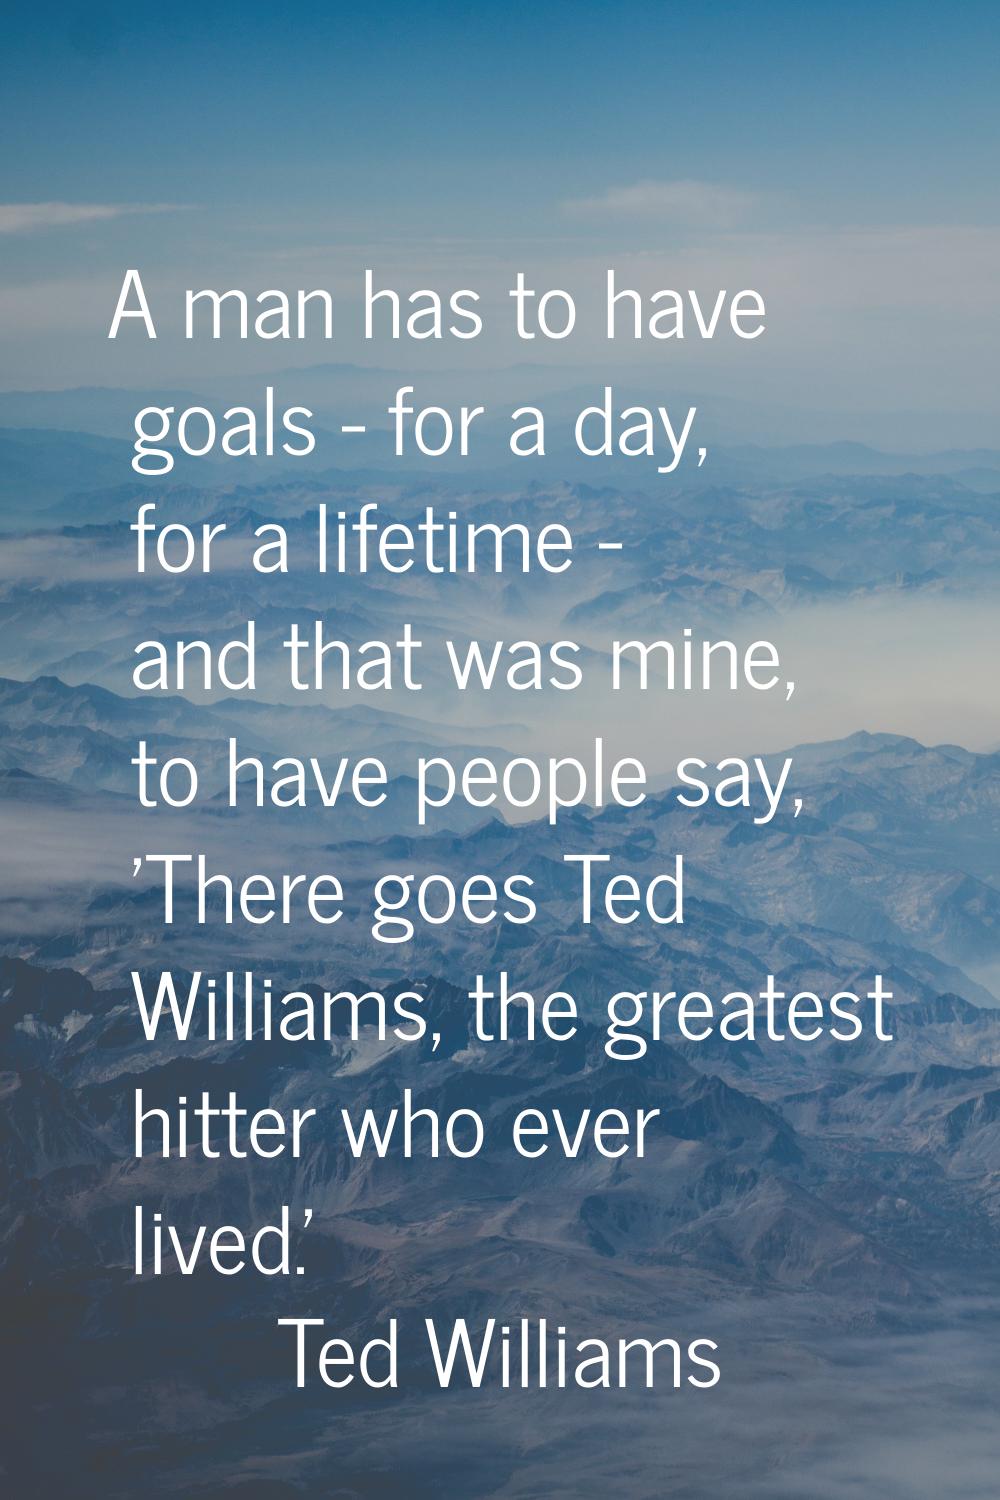 A man has to have goals - for a day, for a lifetime - and that was mine, to have people say, 'There